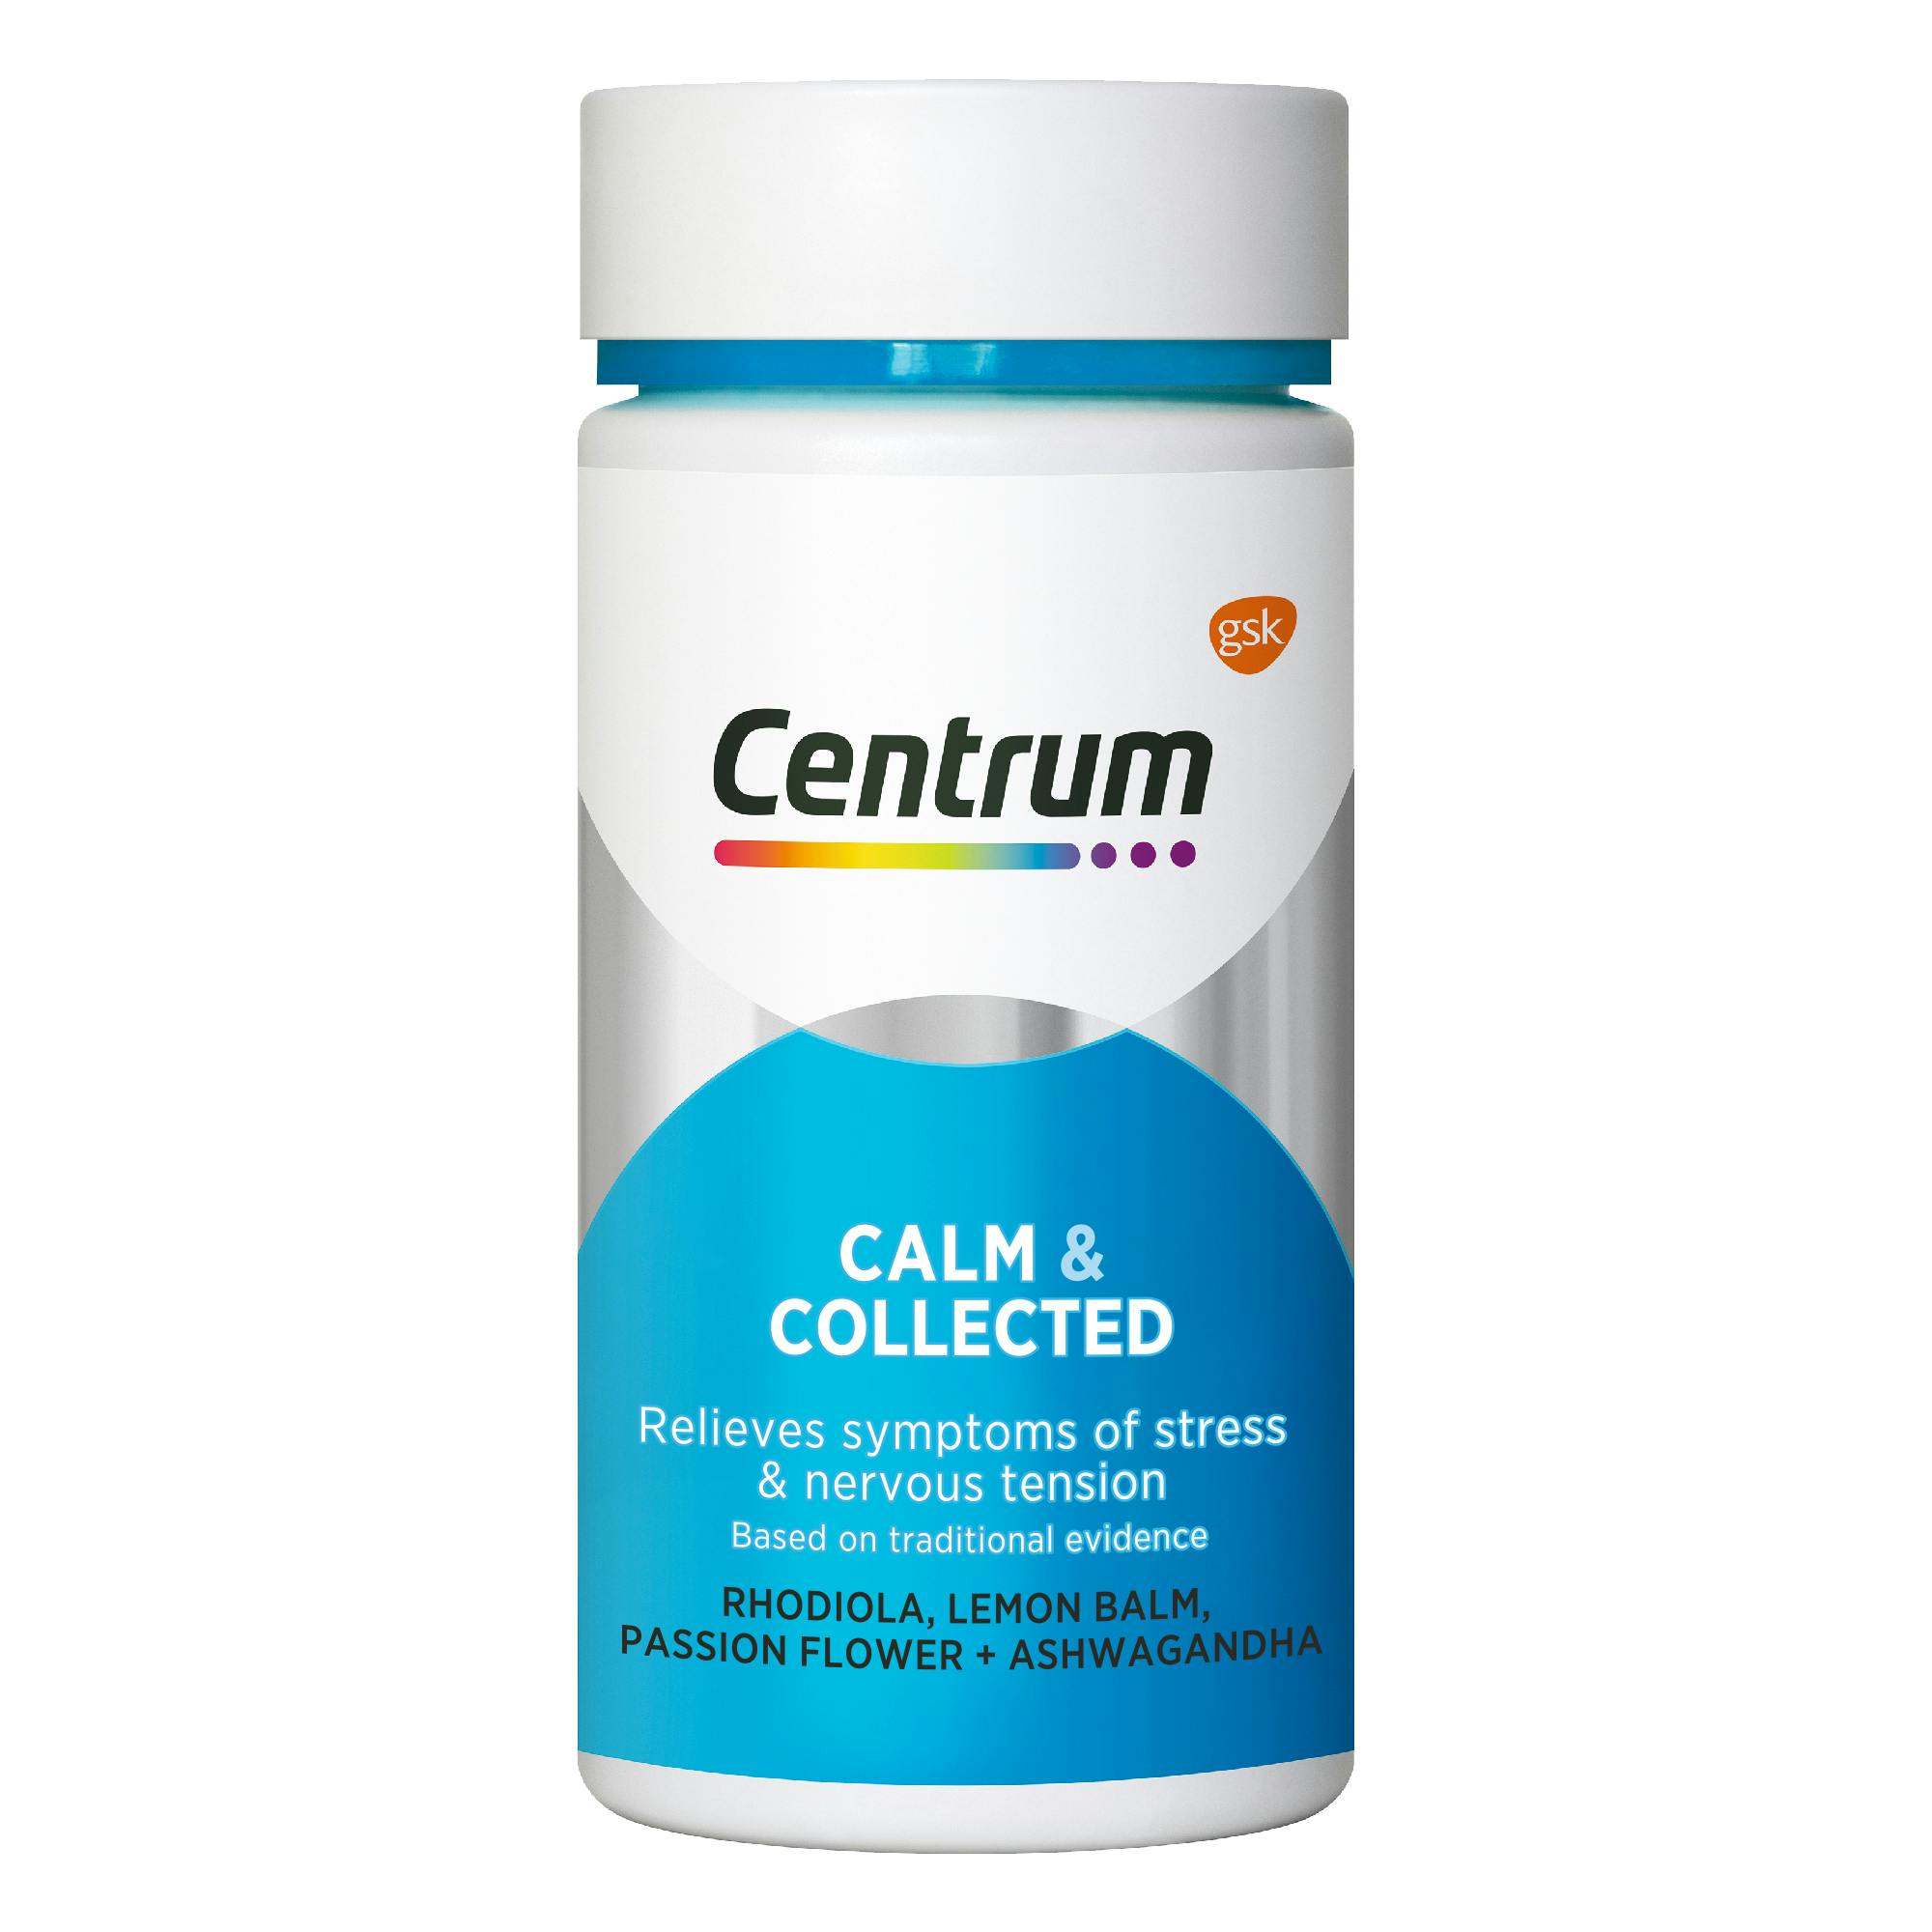 Bottle of Calm & Collected from the Centrum Benefits Blend (50 capsules)